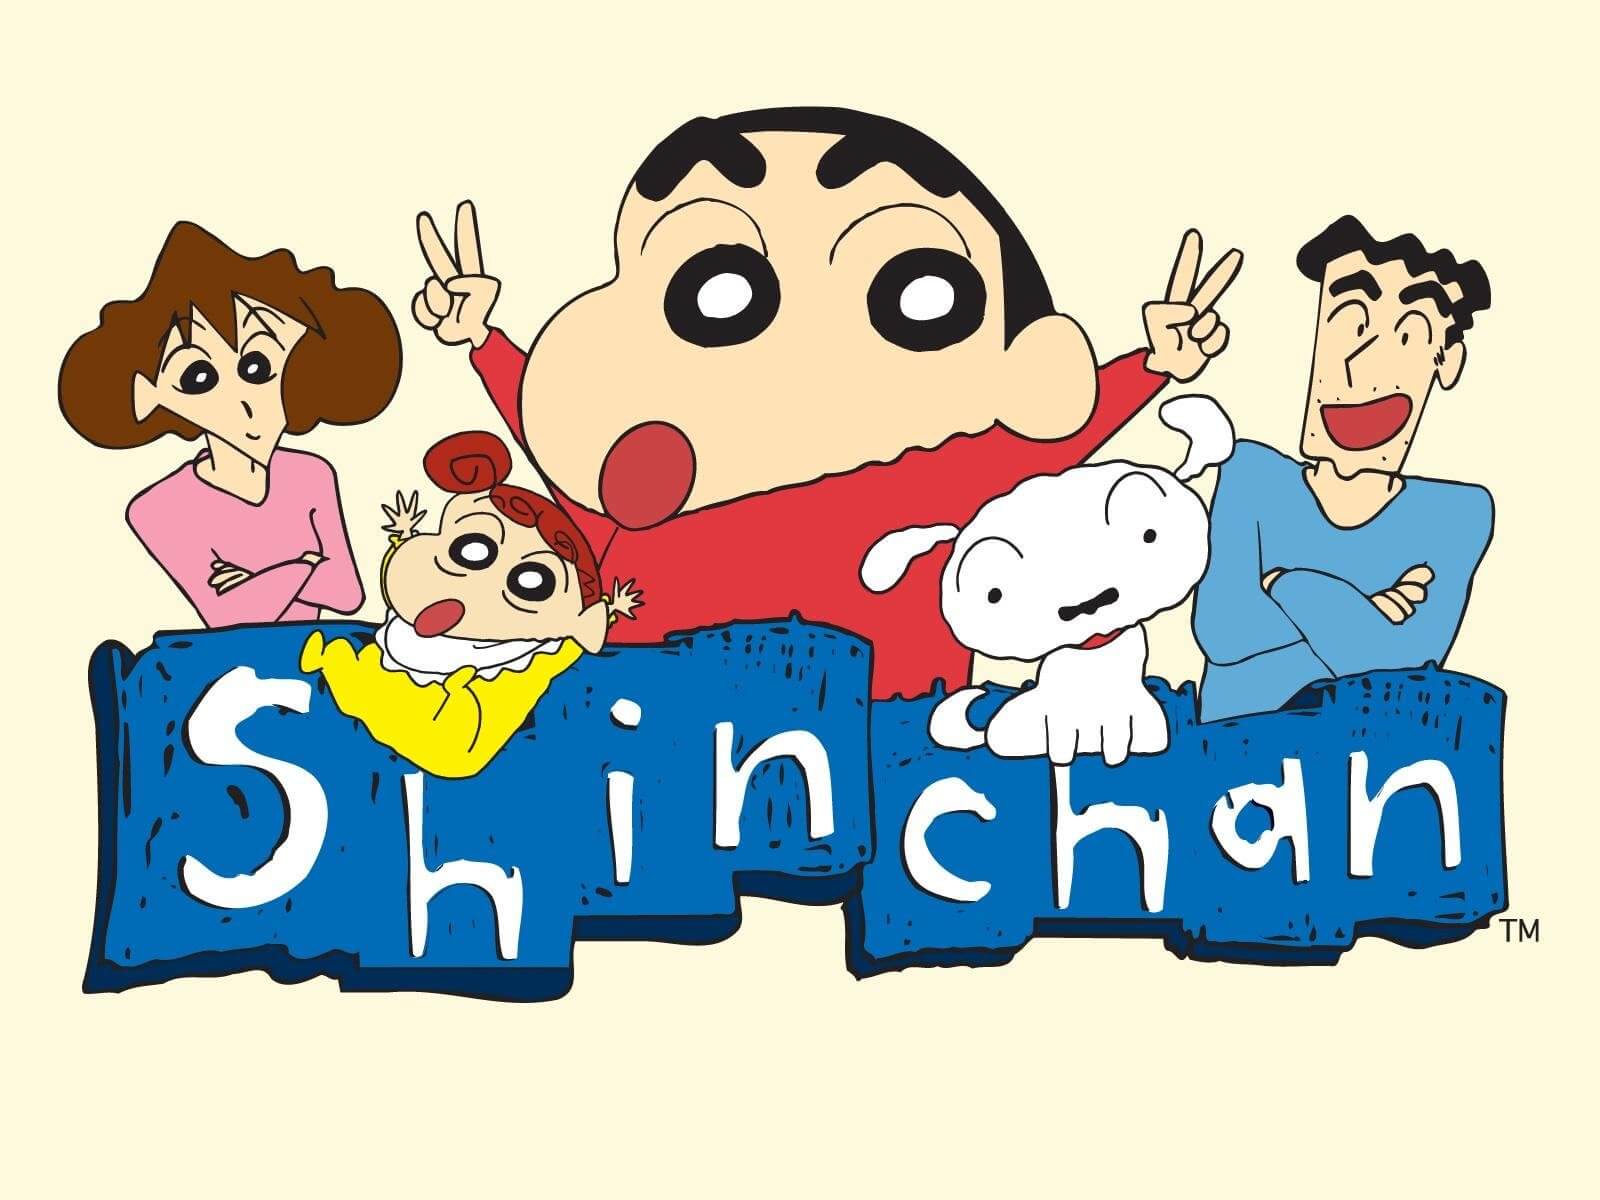 How to Draw a Shinchan Easily || Colour drawing || Step by Ste | Drawings,  Colorful drawings, Step by step drawing